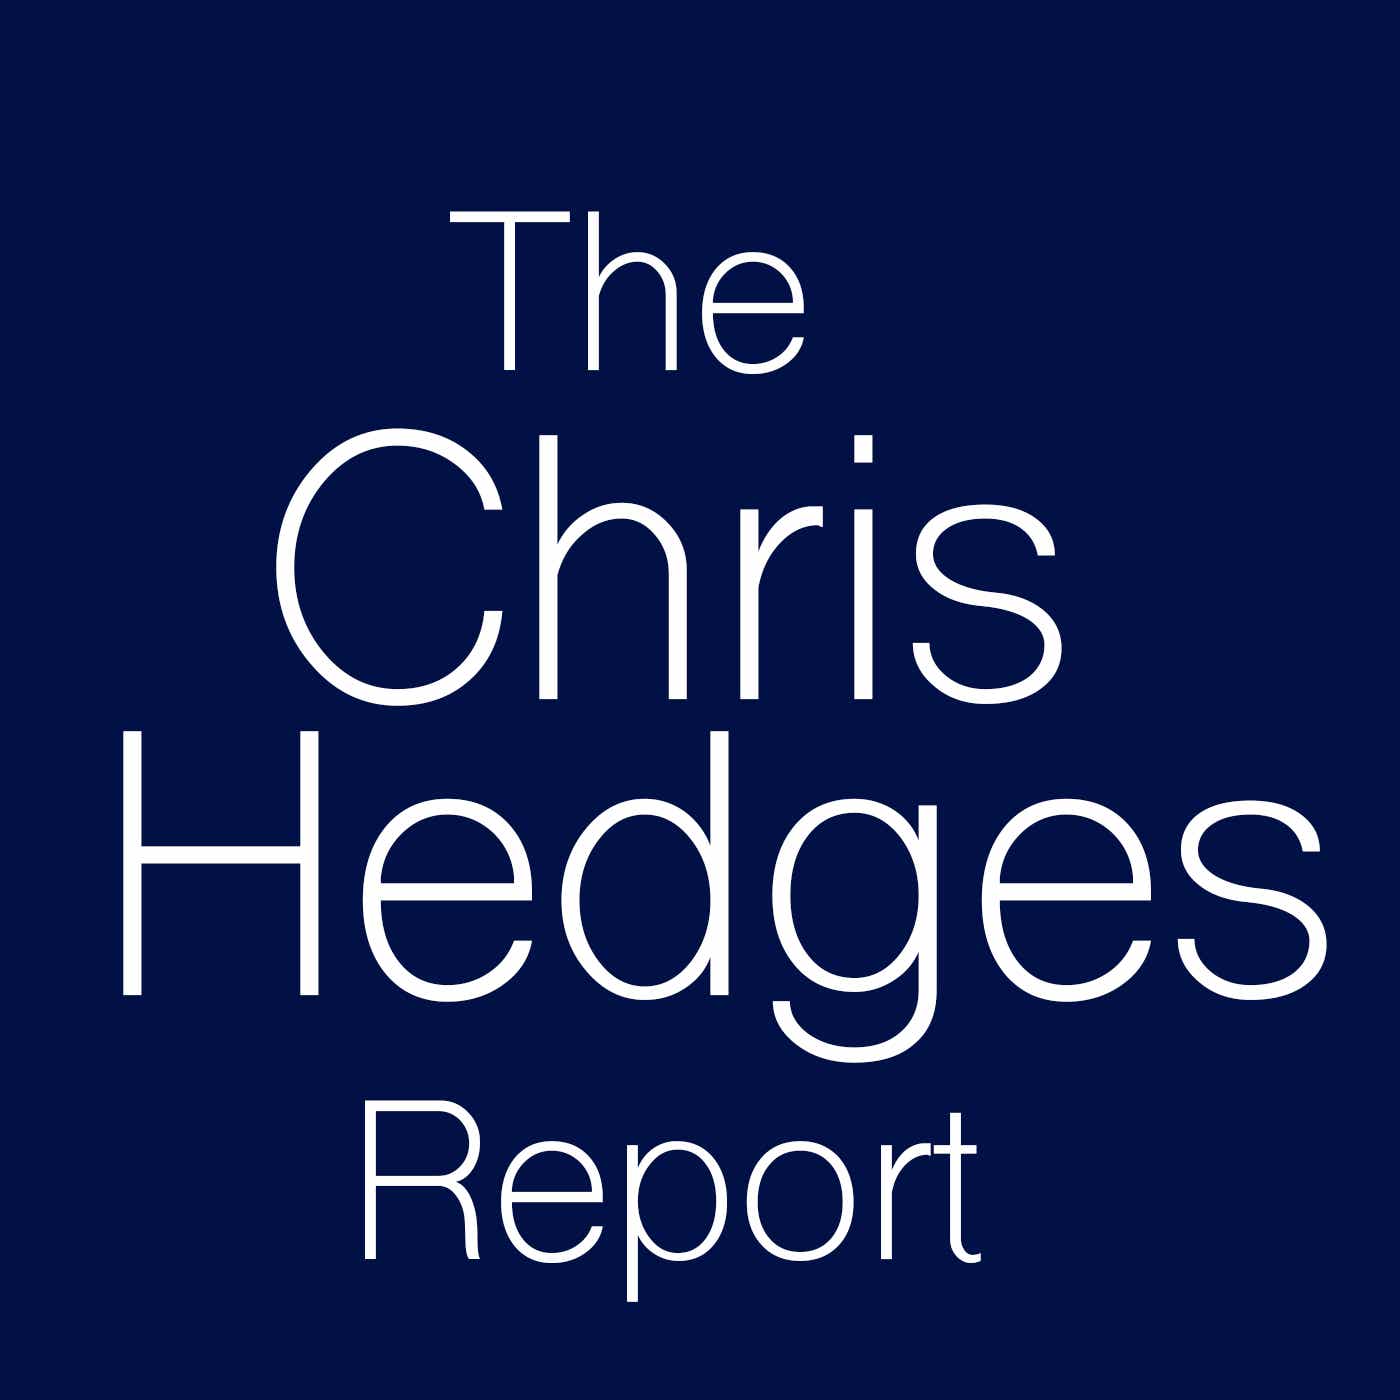 The Chris Hedges Report Podcast